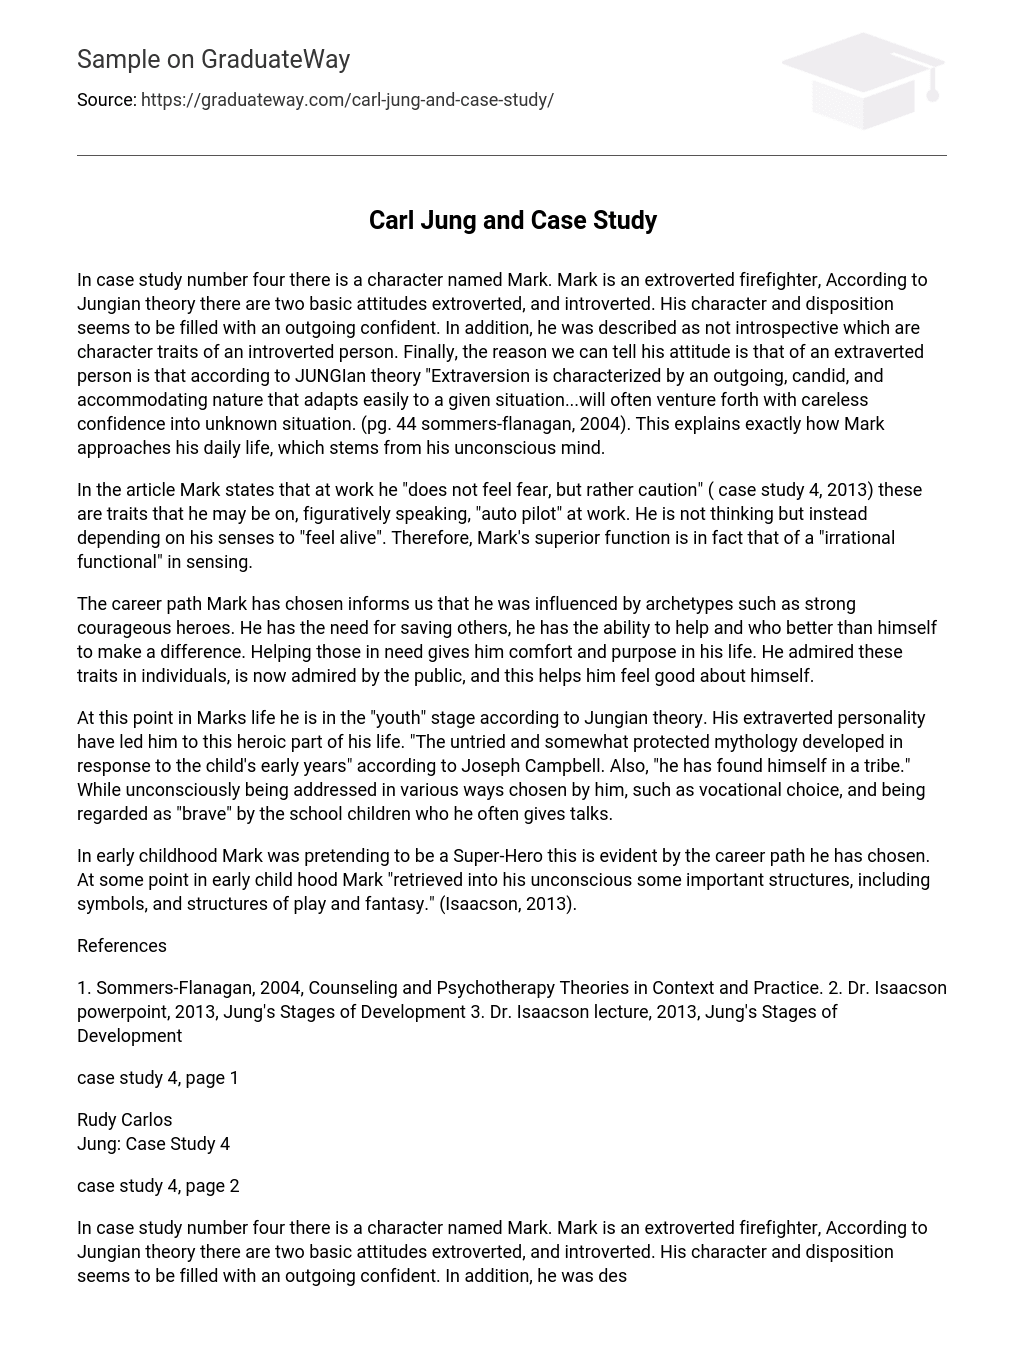 Carl Jung and Case Study